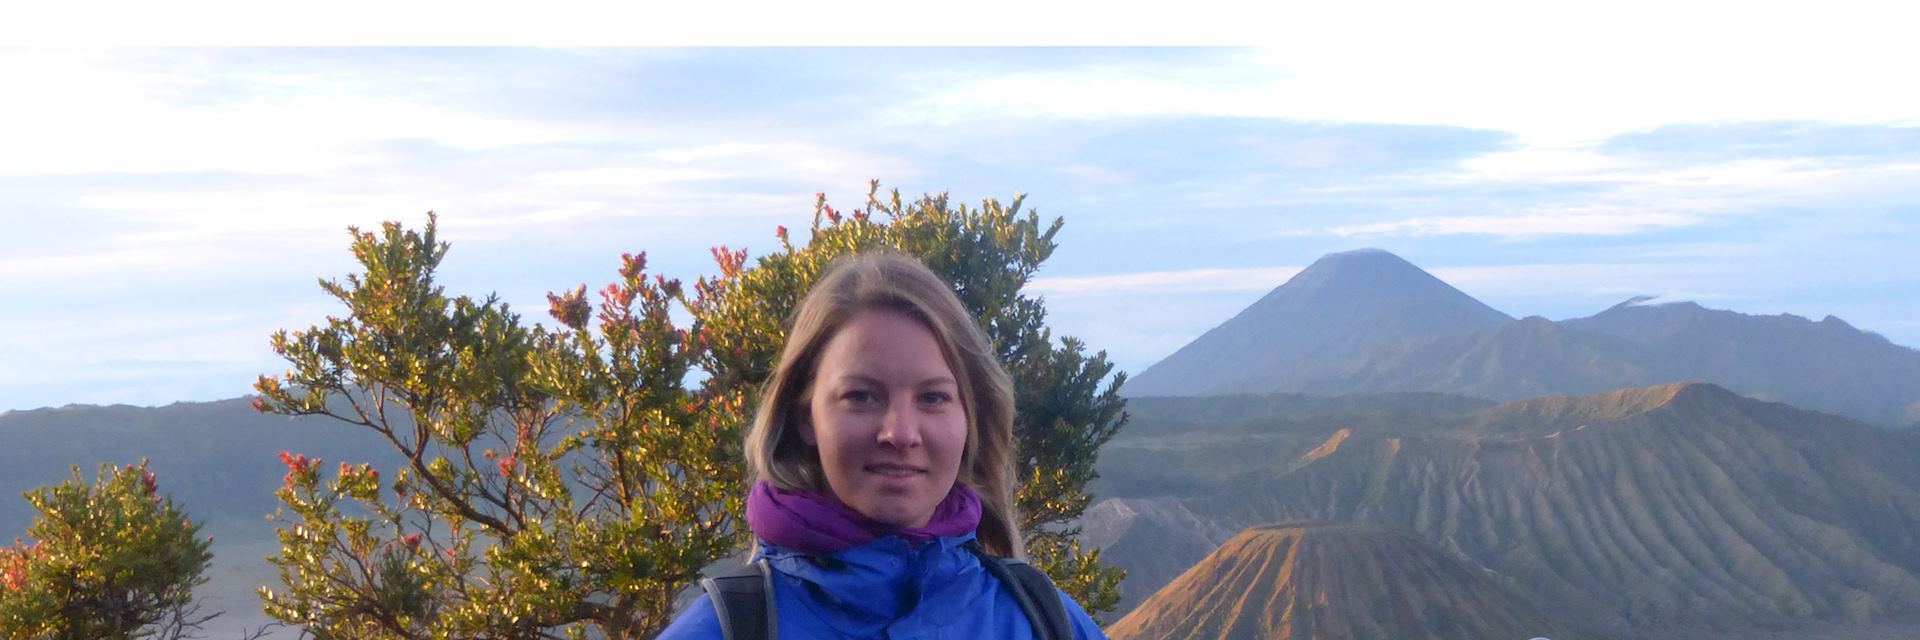 Harriet after sunrise at the Mount Bromo viewpoint, Java, Indonesia